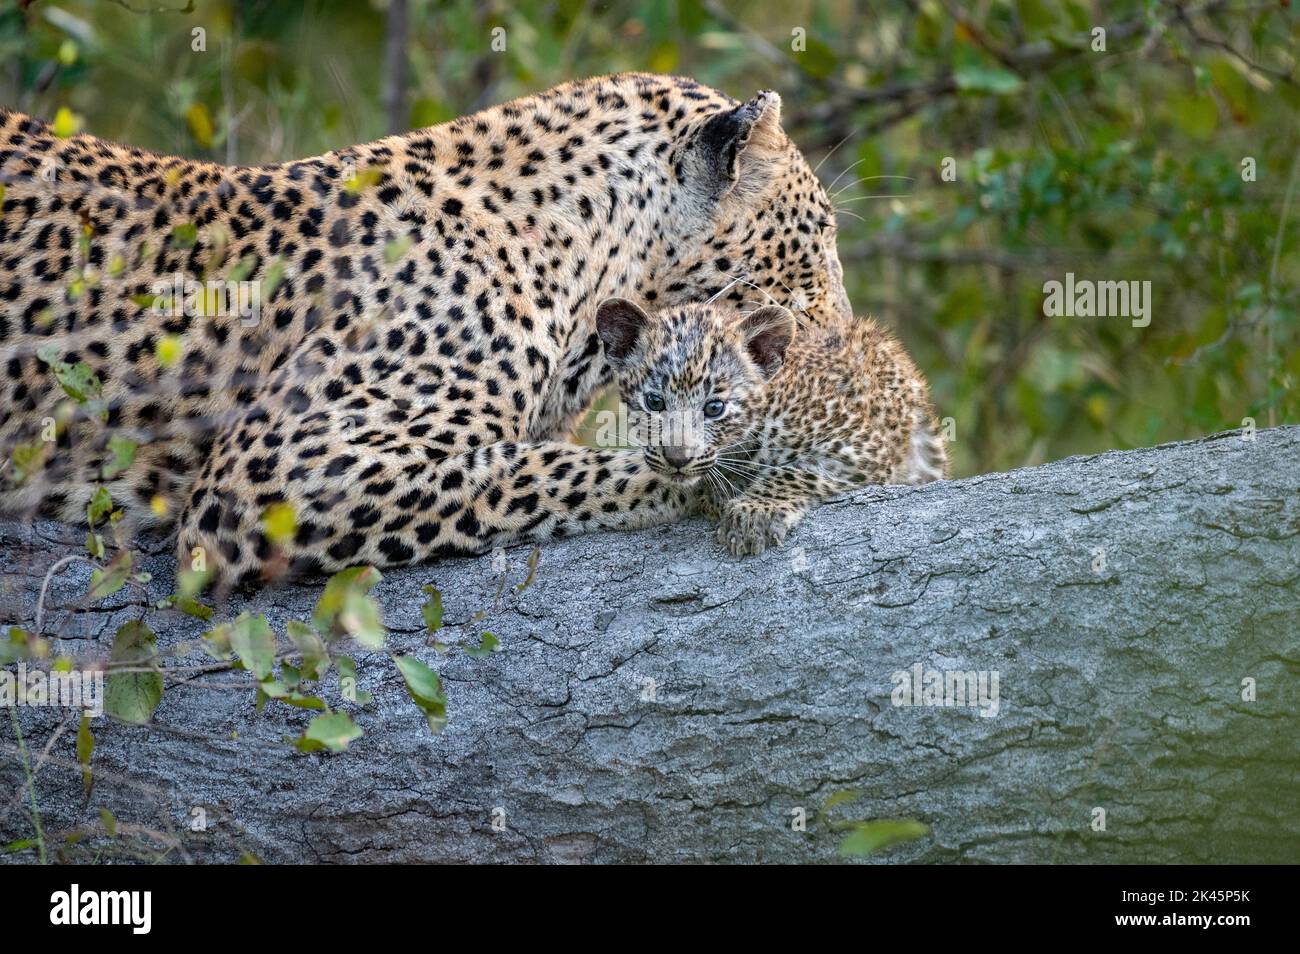 A leopard and her cub, Panthera pardus, lie down together on a log while the leopard cleans her cub Stock Photo